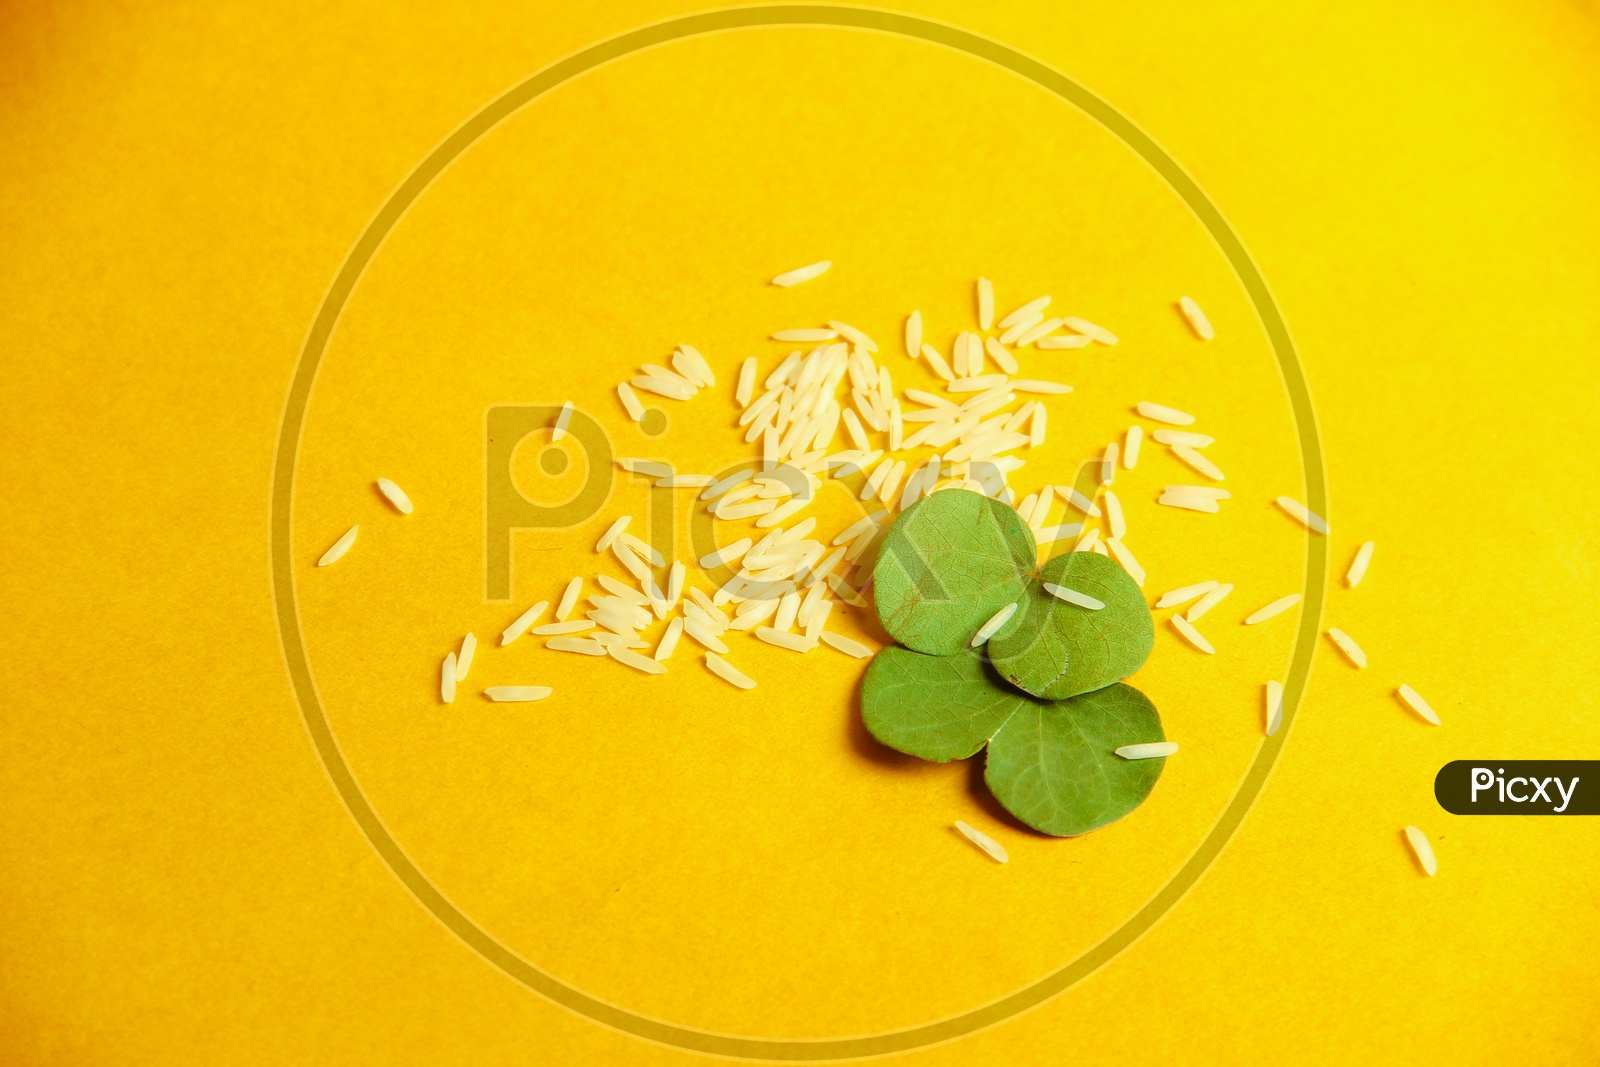 Happy Dussehra Greeting Card and Green Leaf, Rice